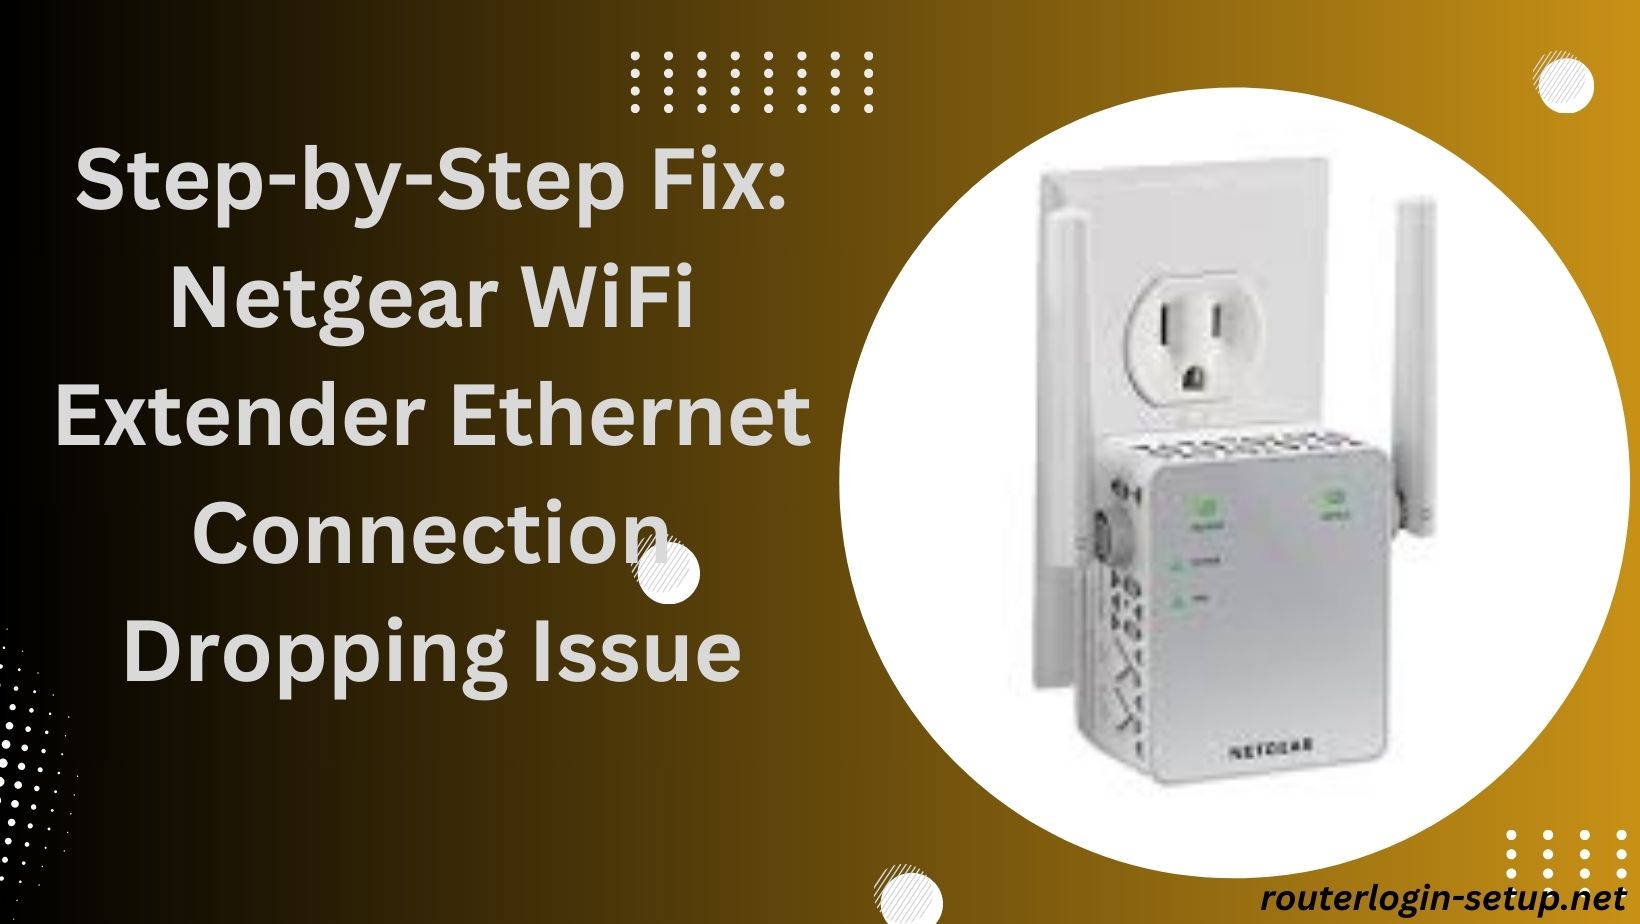 You are currently viewing Step-by-Step Fix: Netgear WiFi Extender Ethernet Connection Dropping Issue